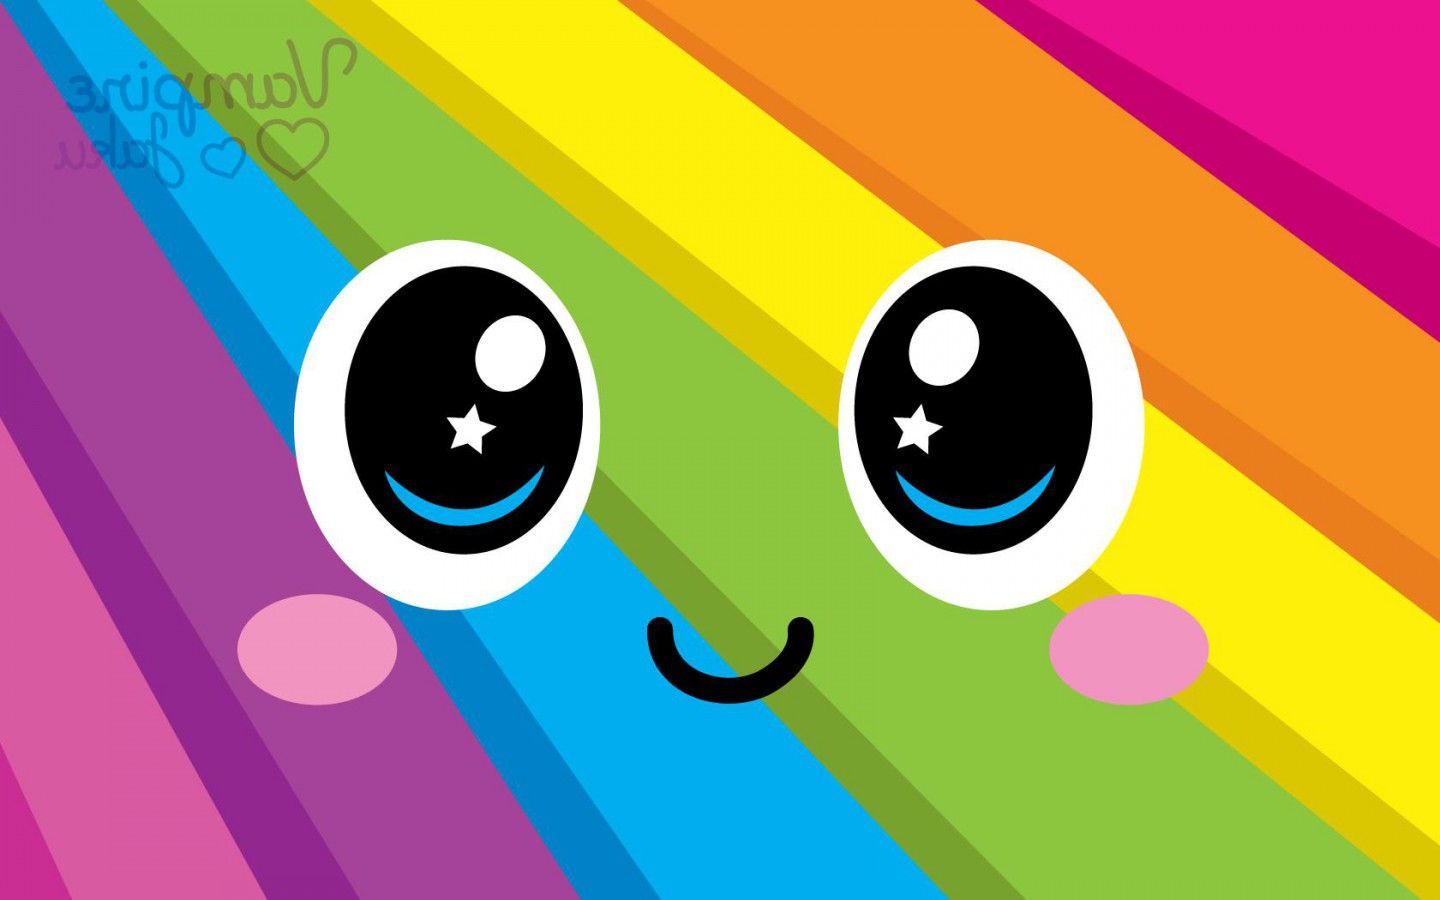 Free Adorable Happy Face Images - Cute Smiley Face Backgrounds - HD Wallpaper 